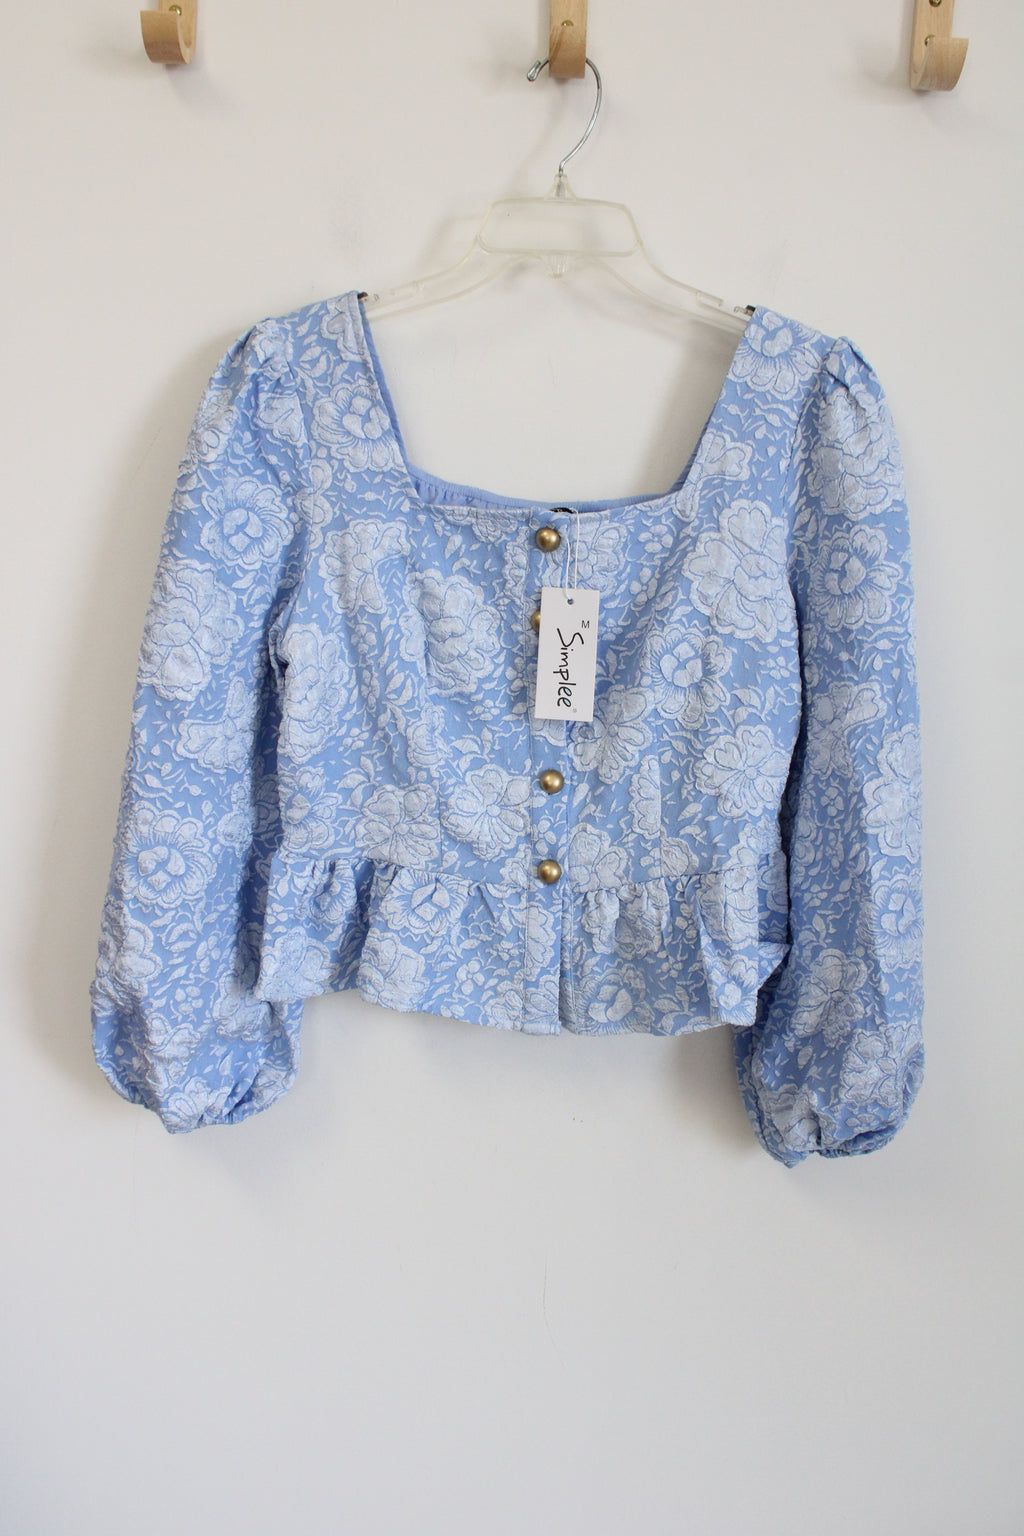 NEW Simplee Blue Floral Top | M